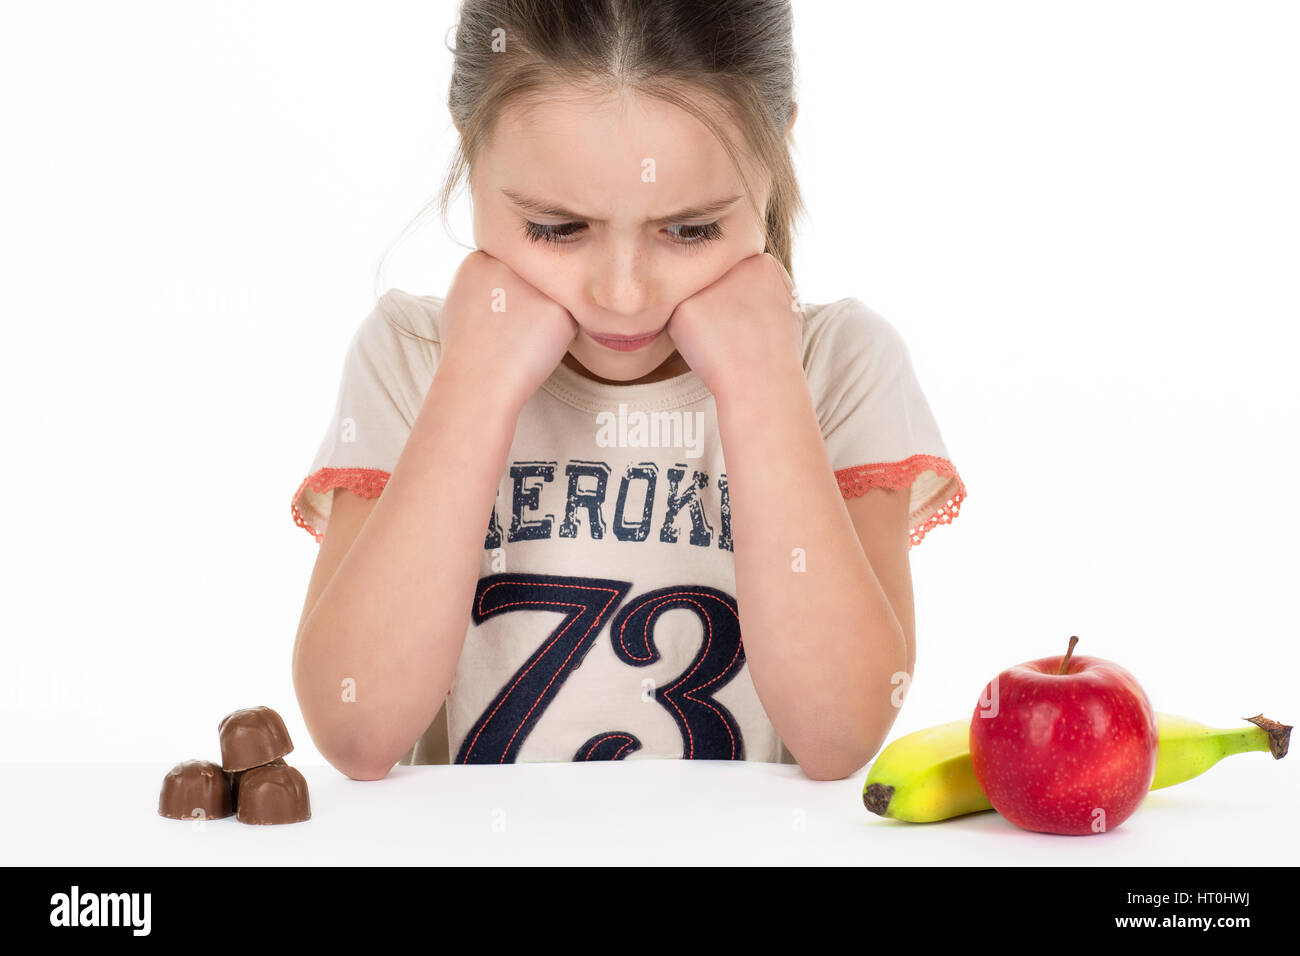 Girl deciding between sweets and fruits. Isolated. White background. Stock Photo